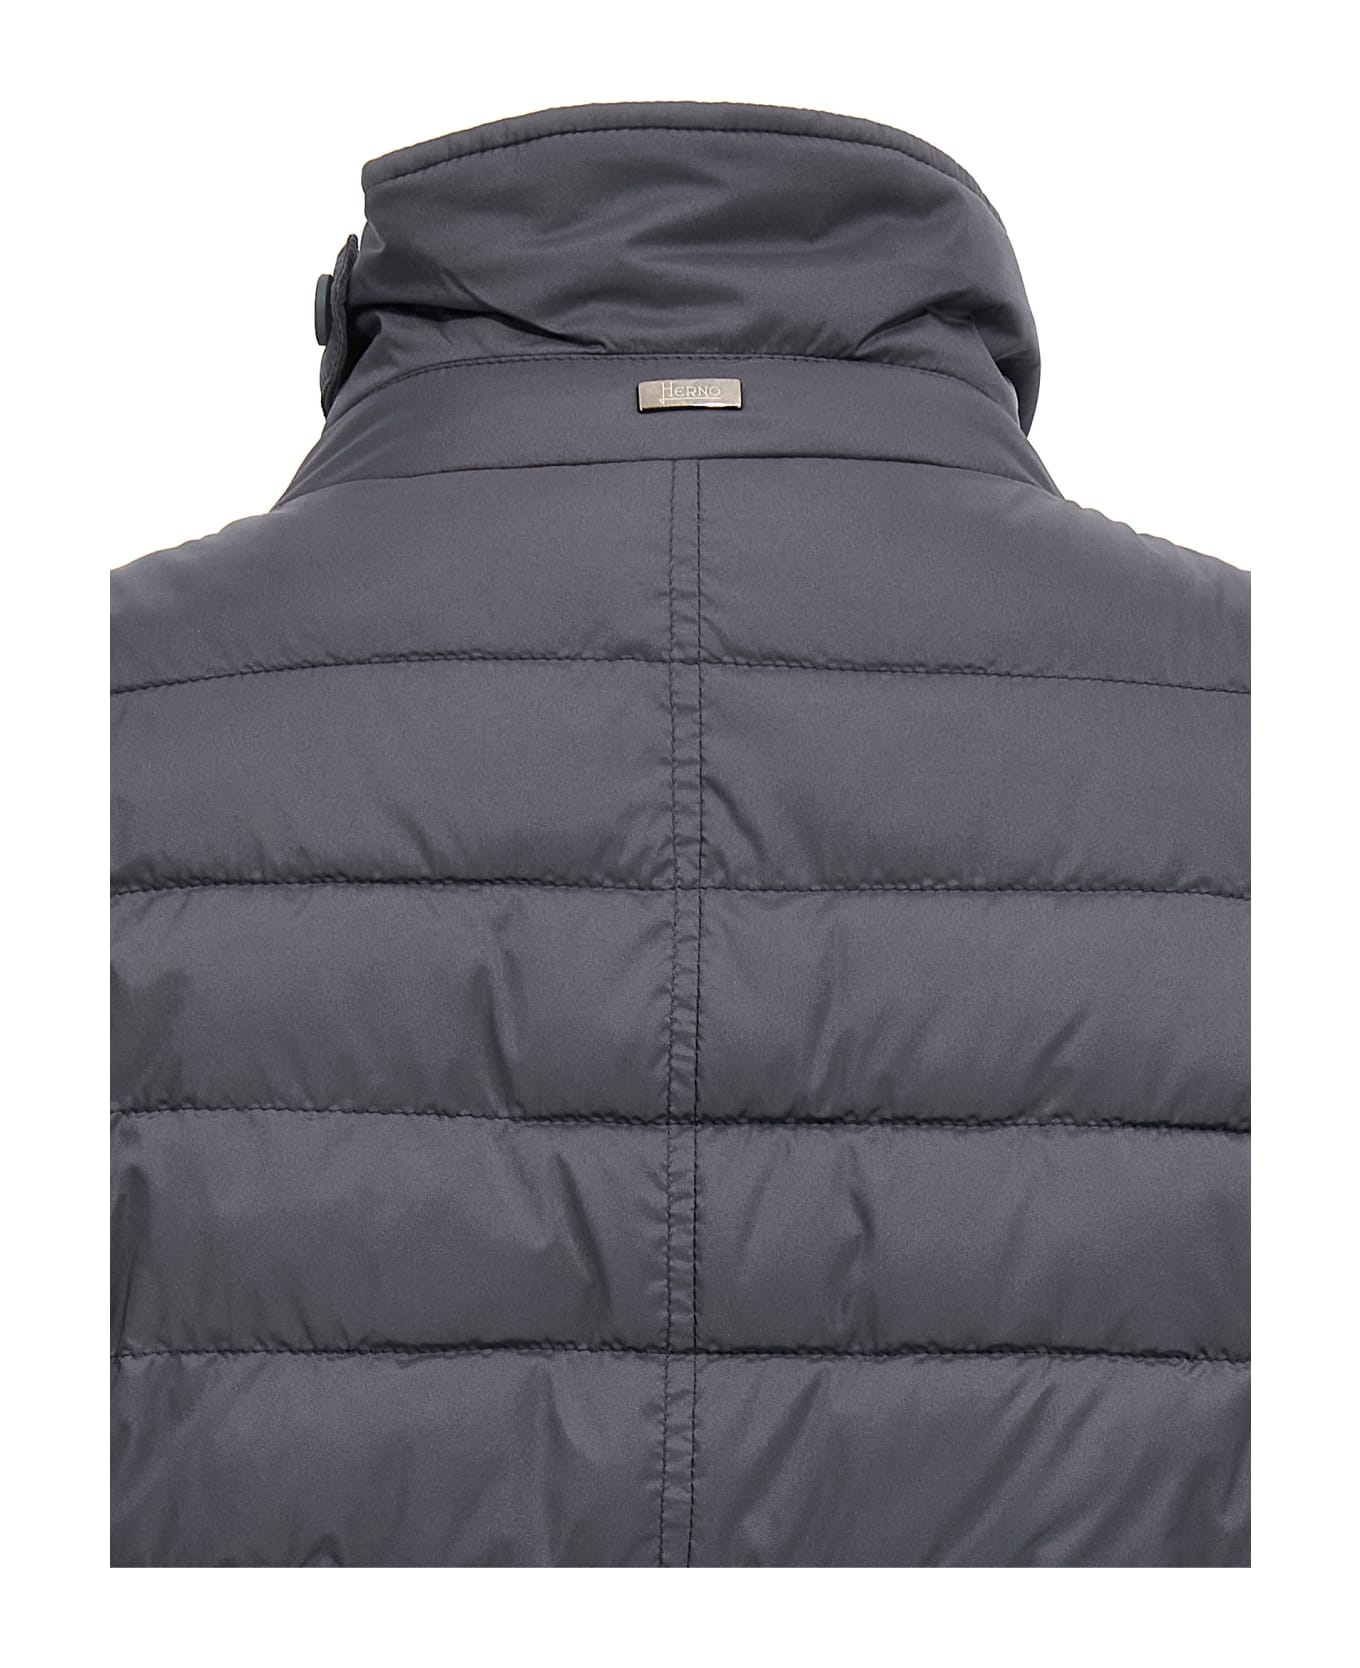 Herno Quilted Puffer Jacket - Blue